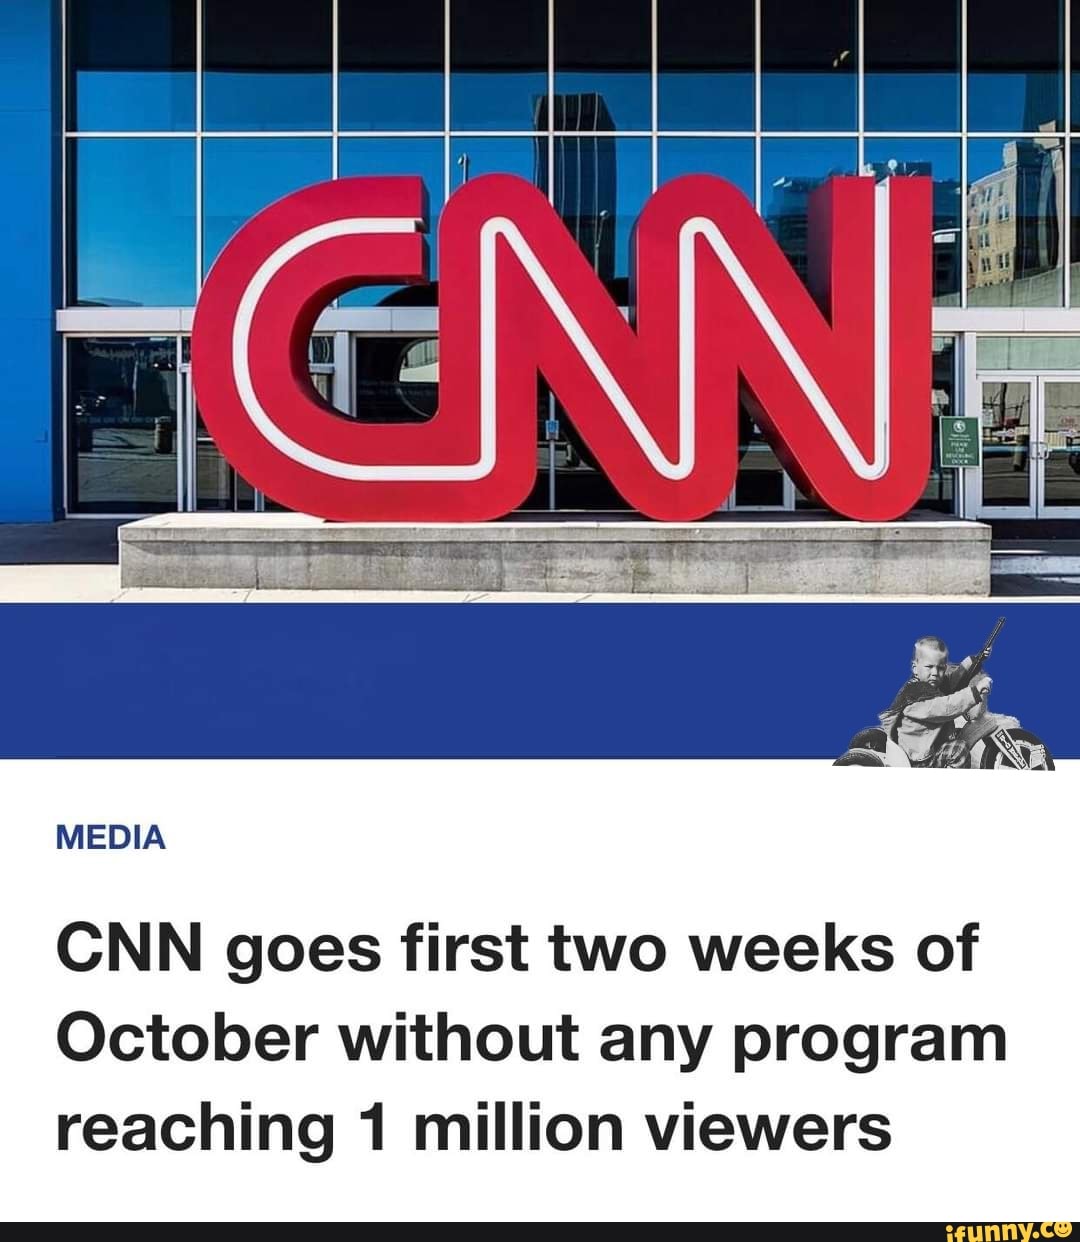 MEDIA CNN goes first two weeks of October without any program reaching